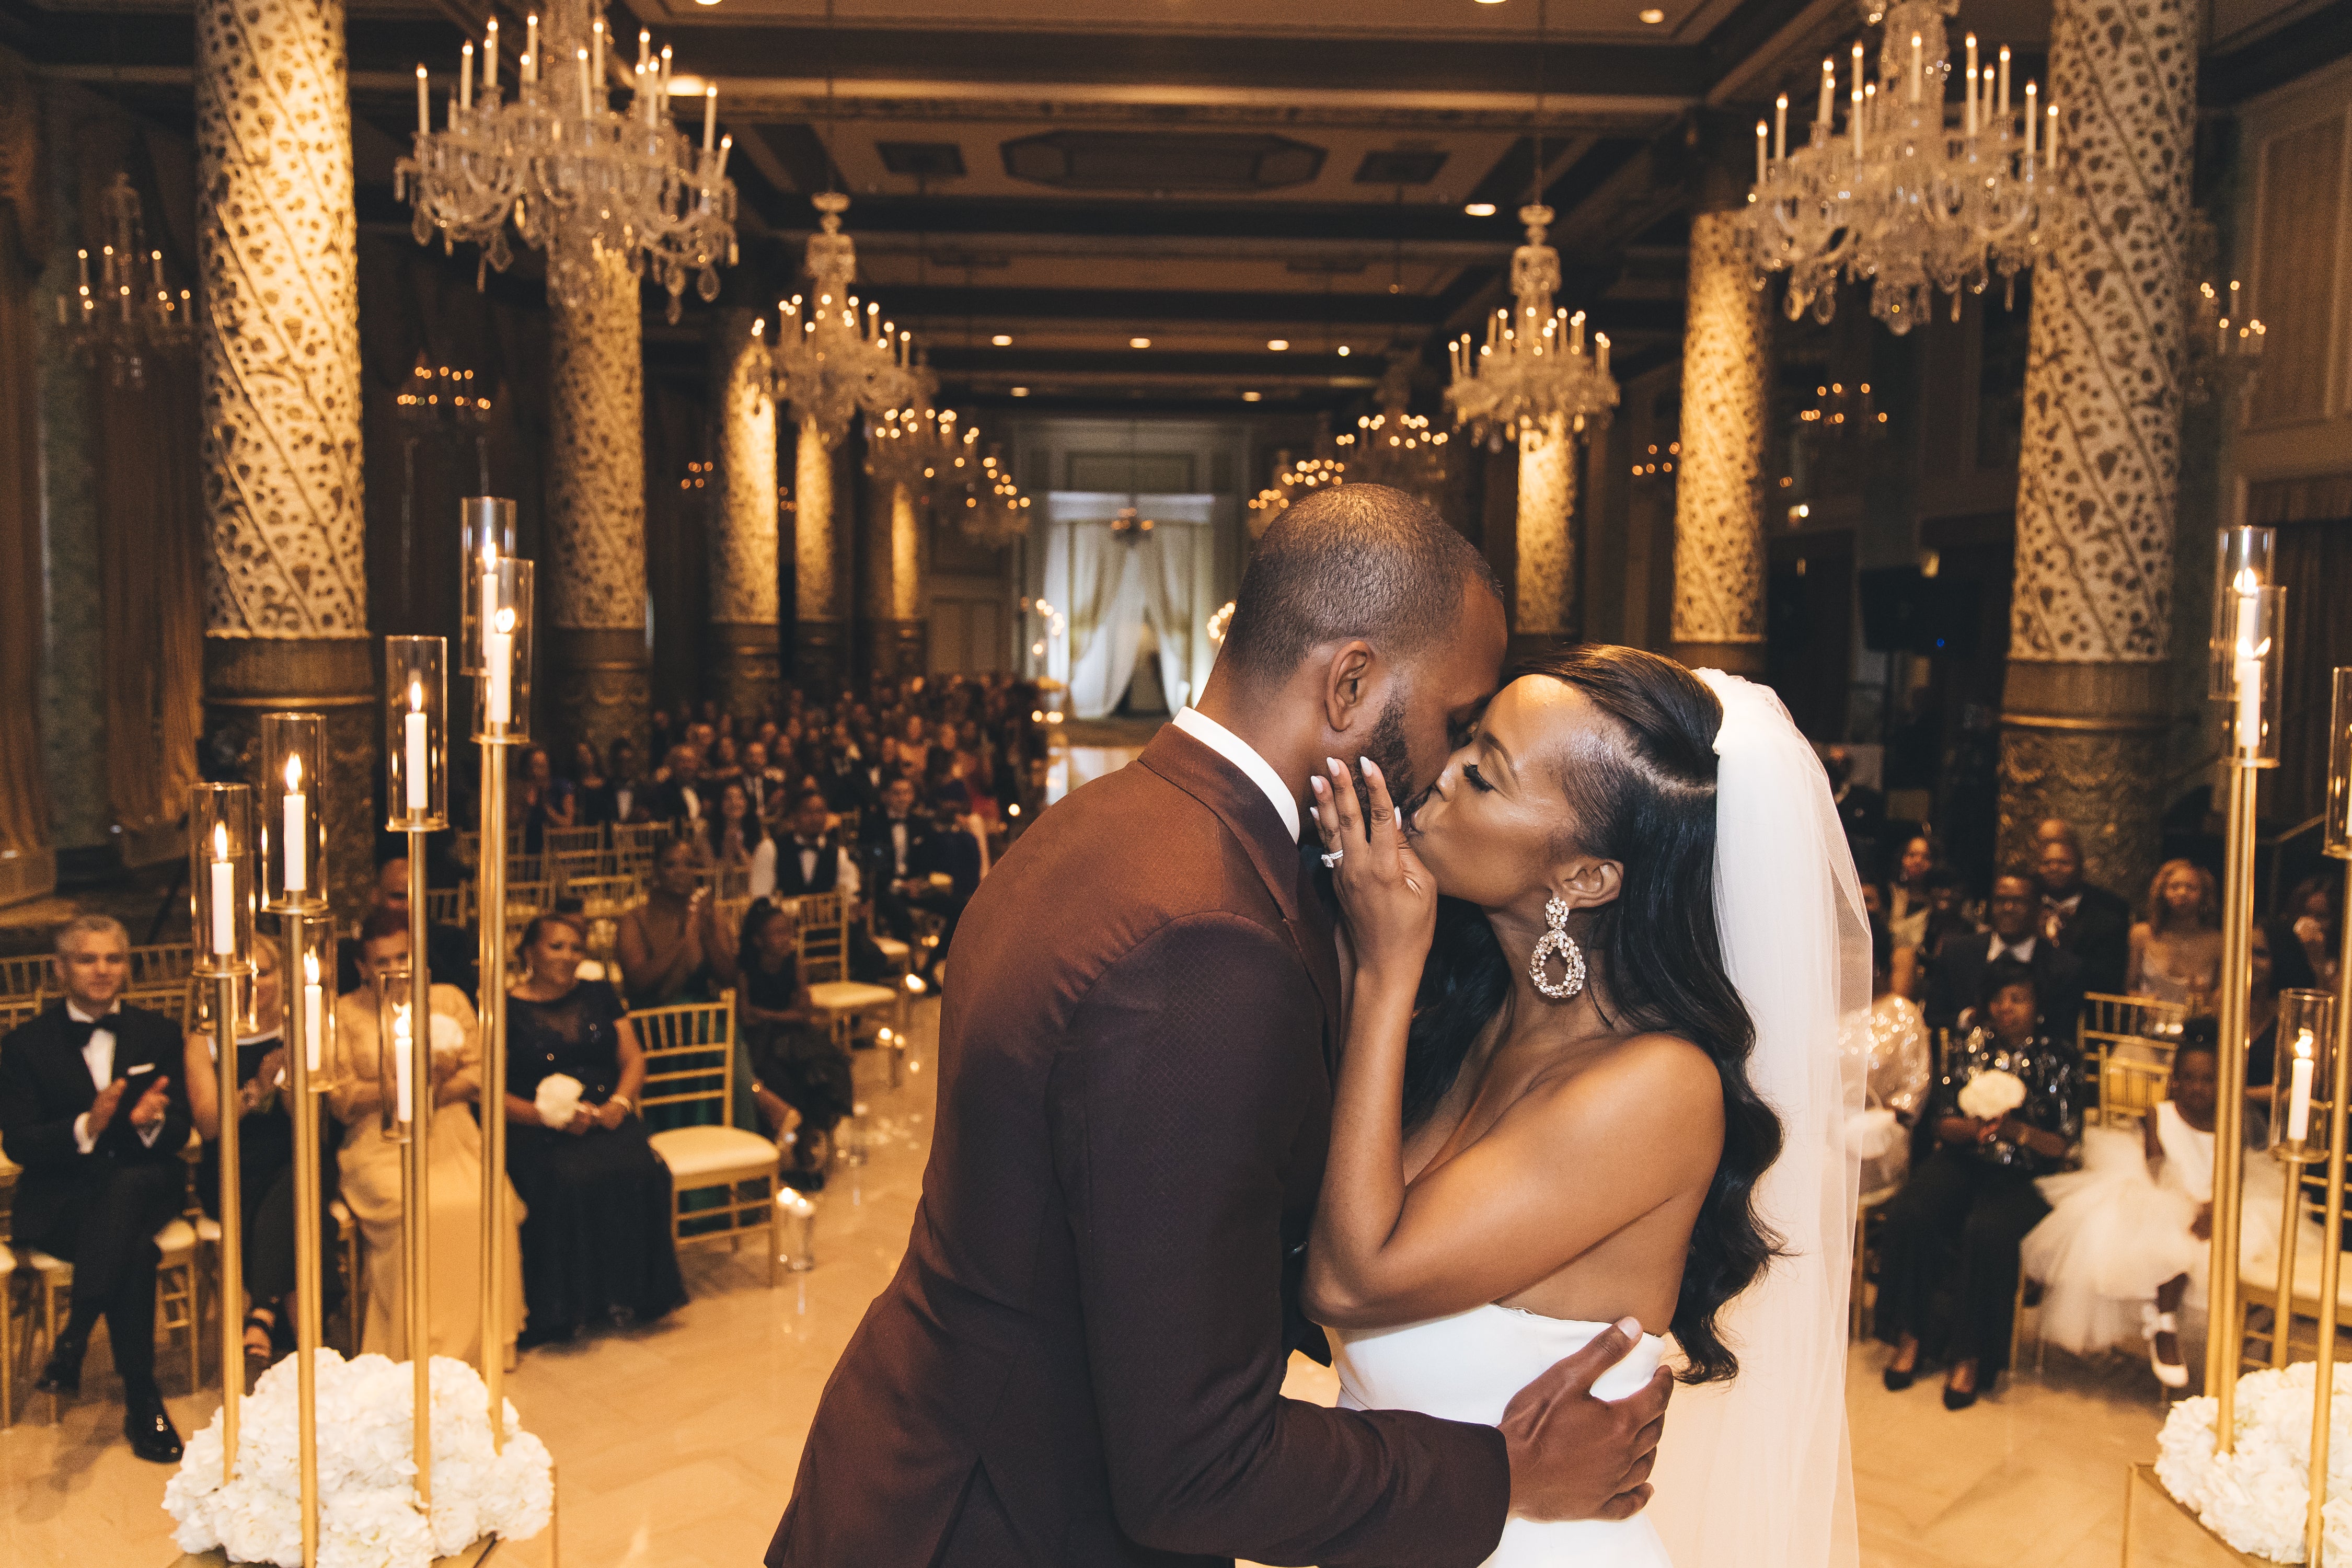 Bridal Bliss: Chloe and Jose's Glam Chicago Wedding Was An Absolute Stunner